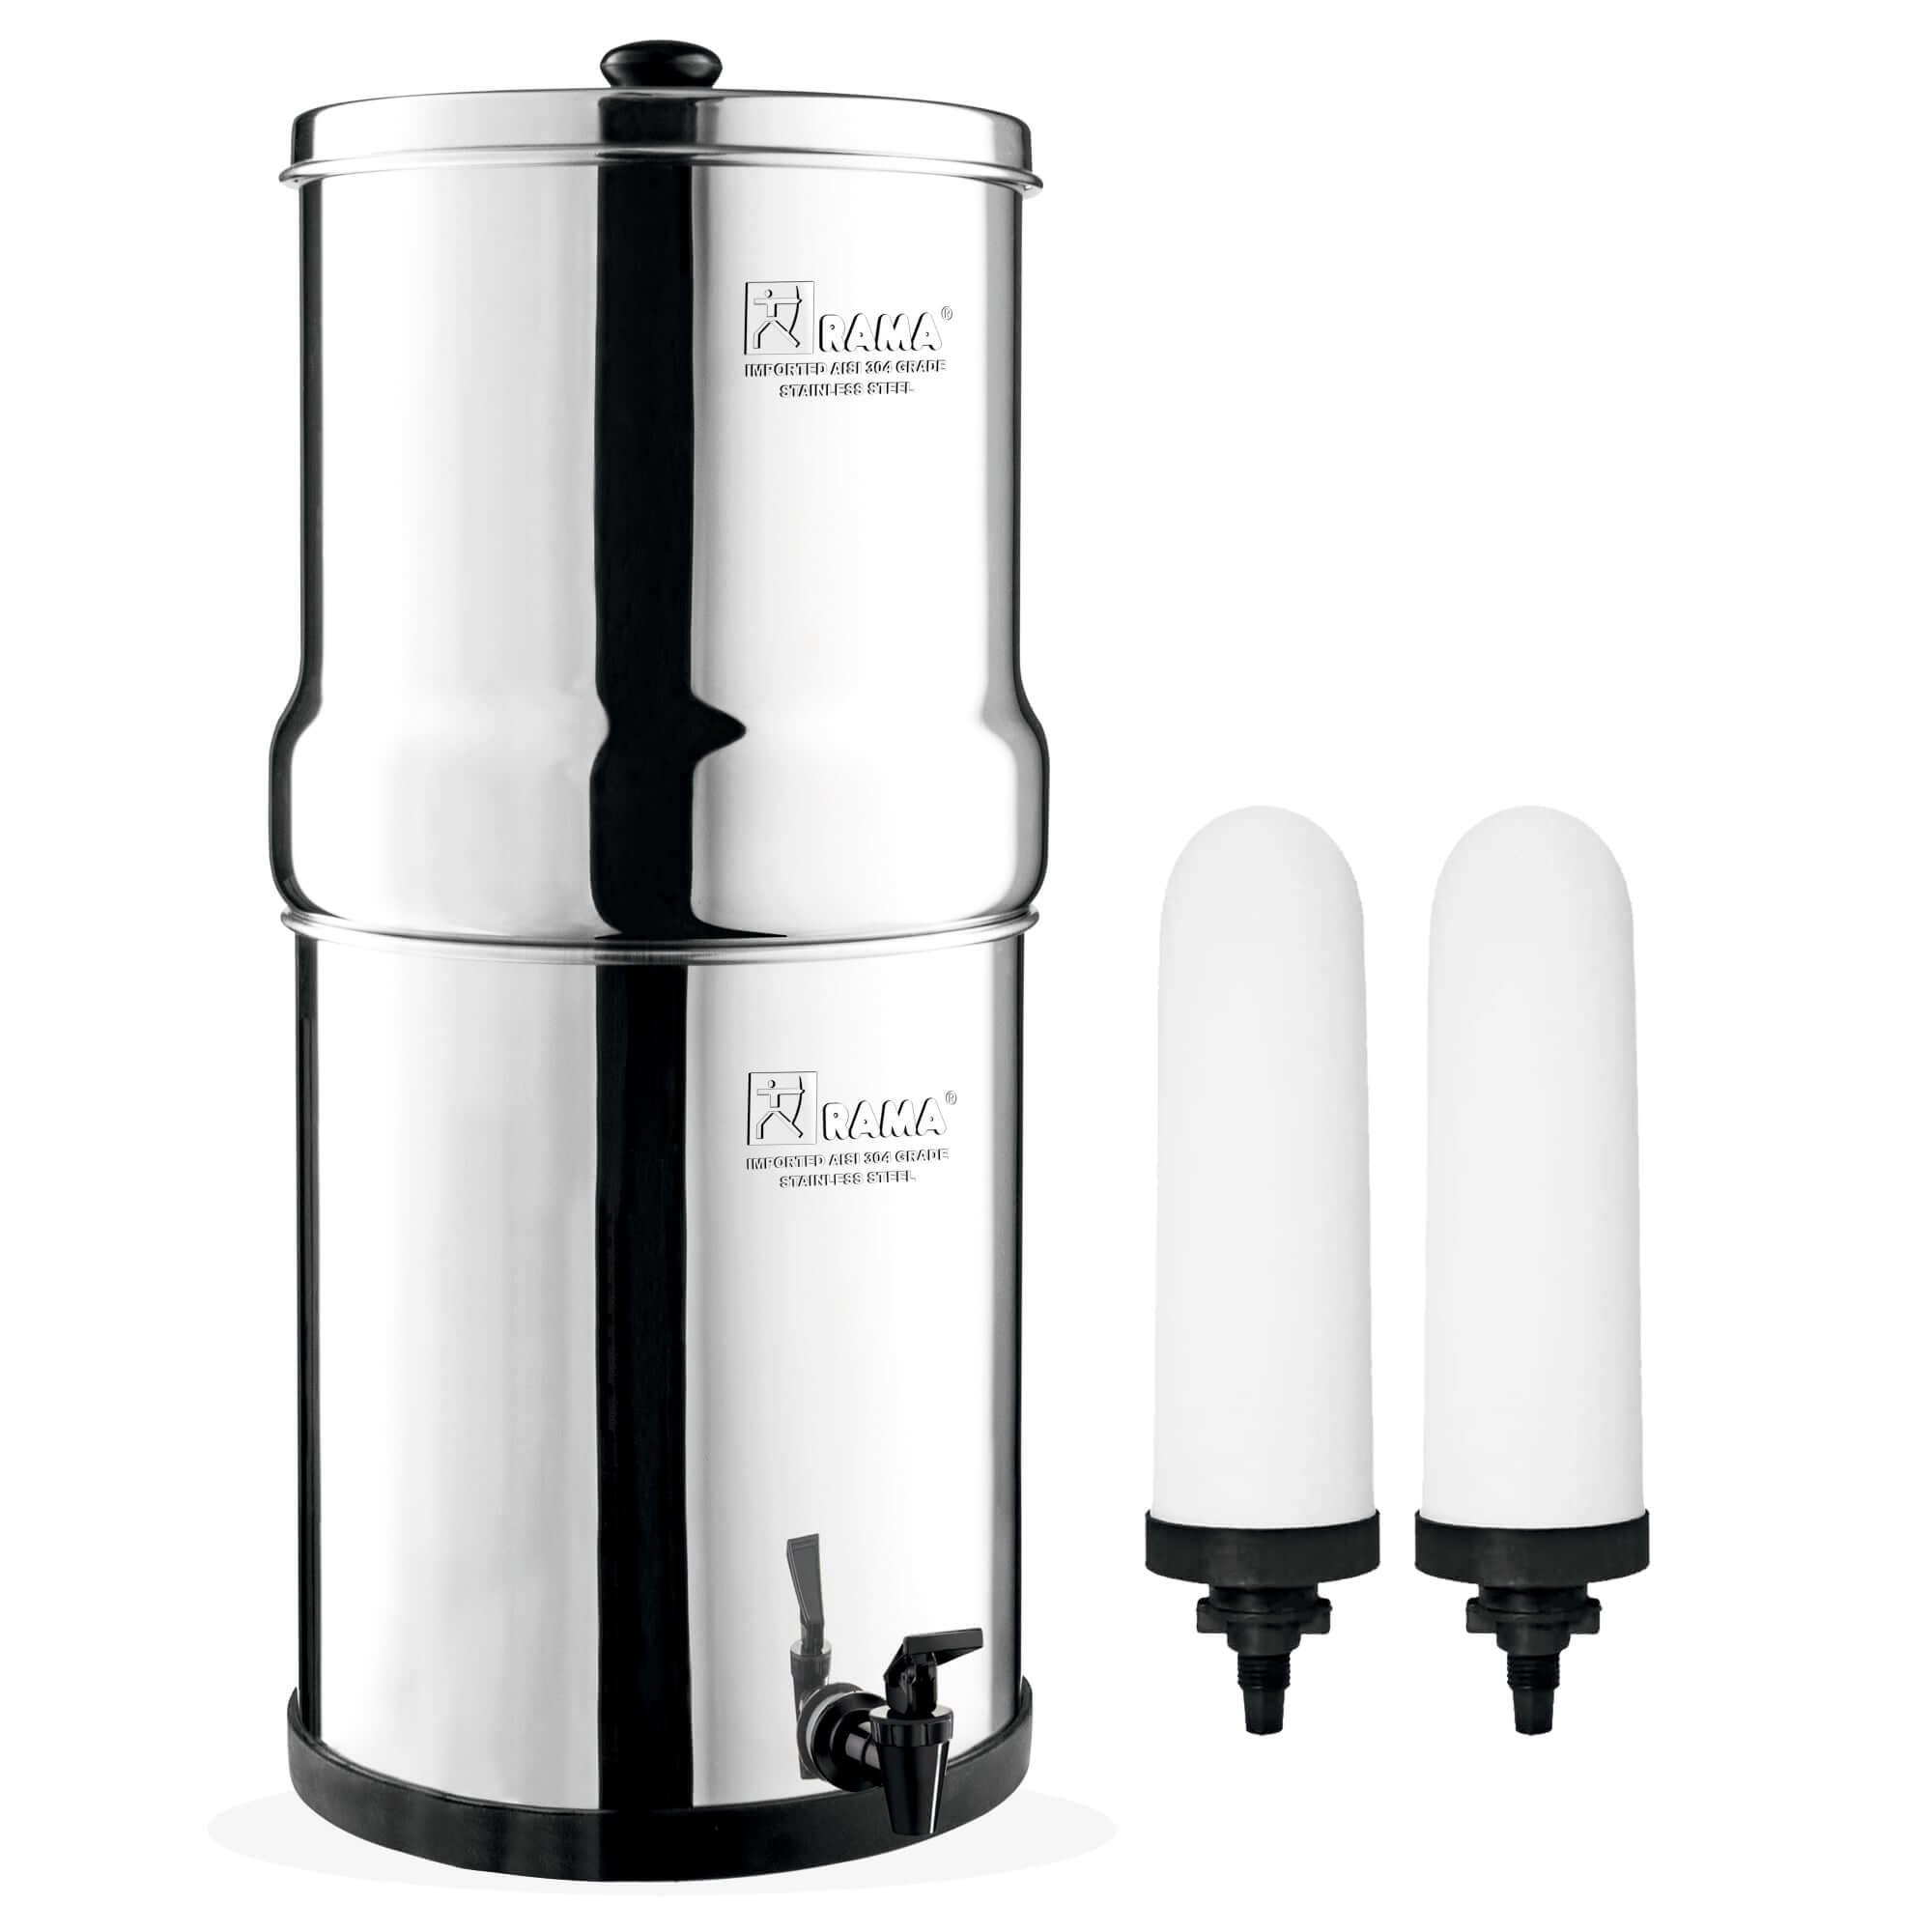 RAMA Water Filter and Purifier, 6 Litre Storage (12 Litre Total Capacity) Made with 304 High Grade Stainless Steel, 10-Year Manufacturer Warranty, Includes 2 Spirit Candles and Plastic Tap - Rama Water Filters